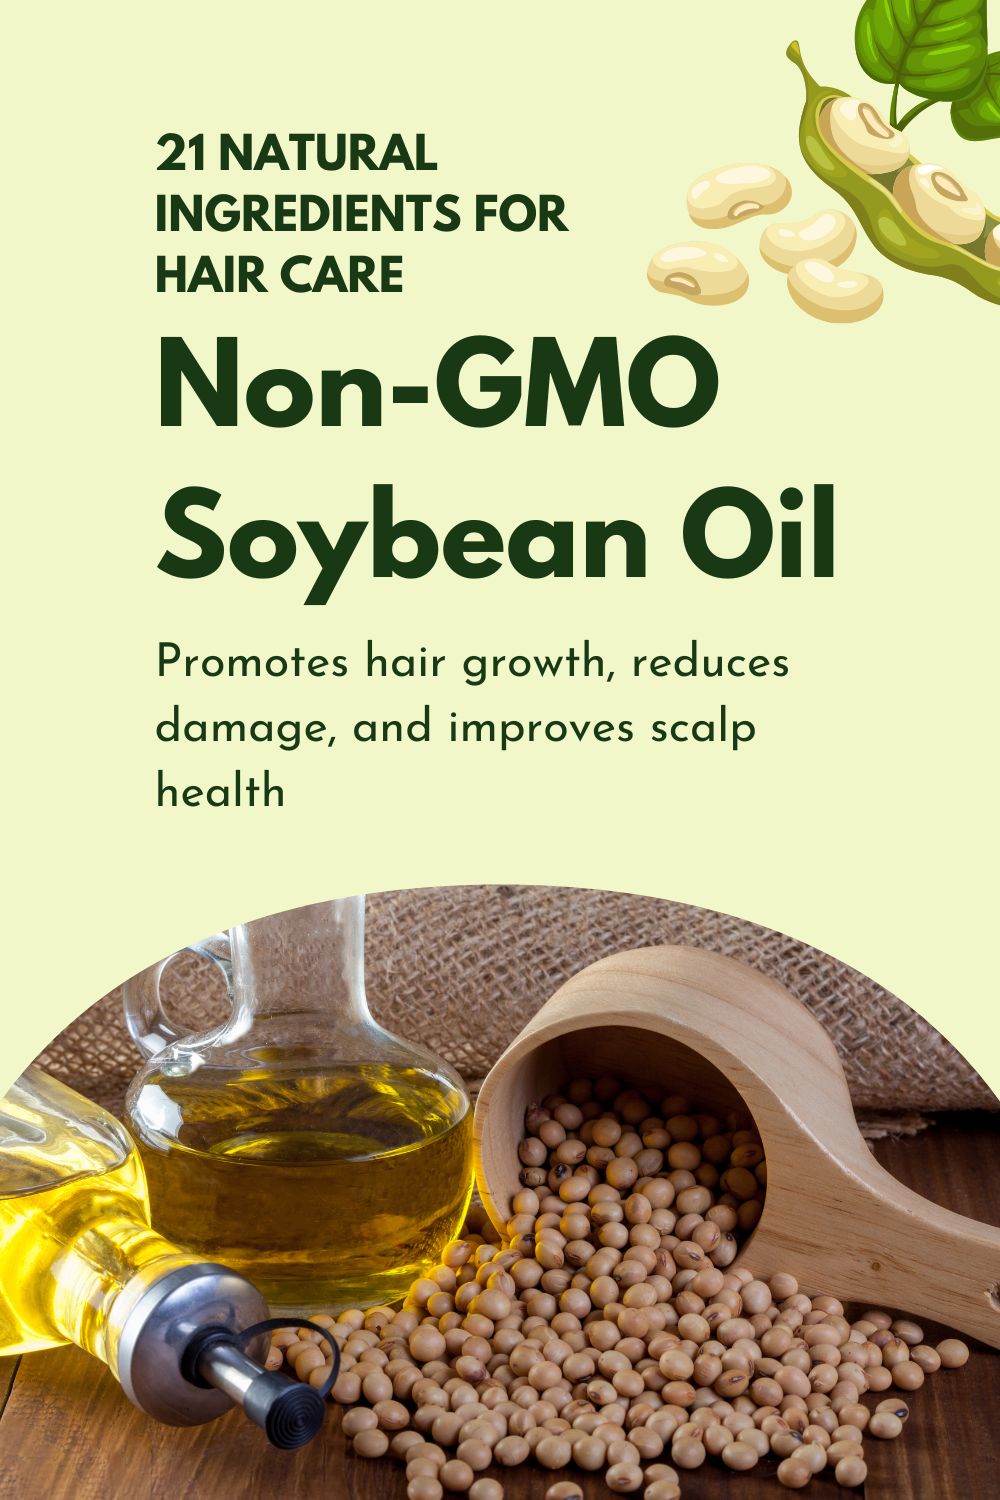 Non-GMO Soybean Oil - Promotes hair growth, reduces damage, and improves scalp health